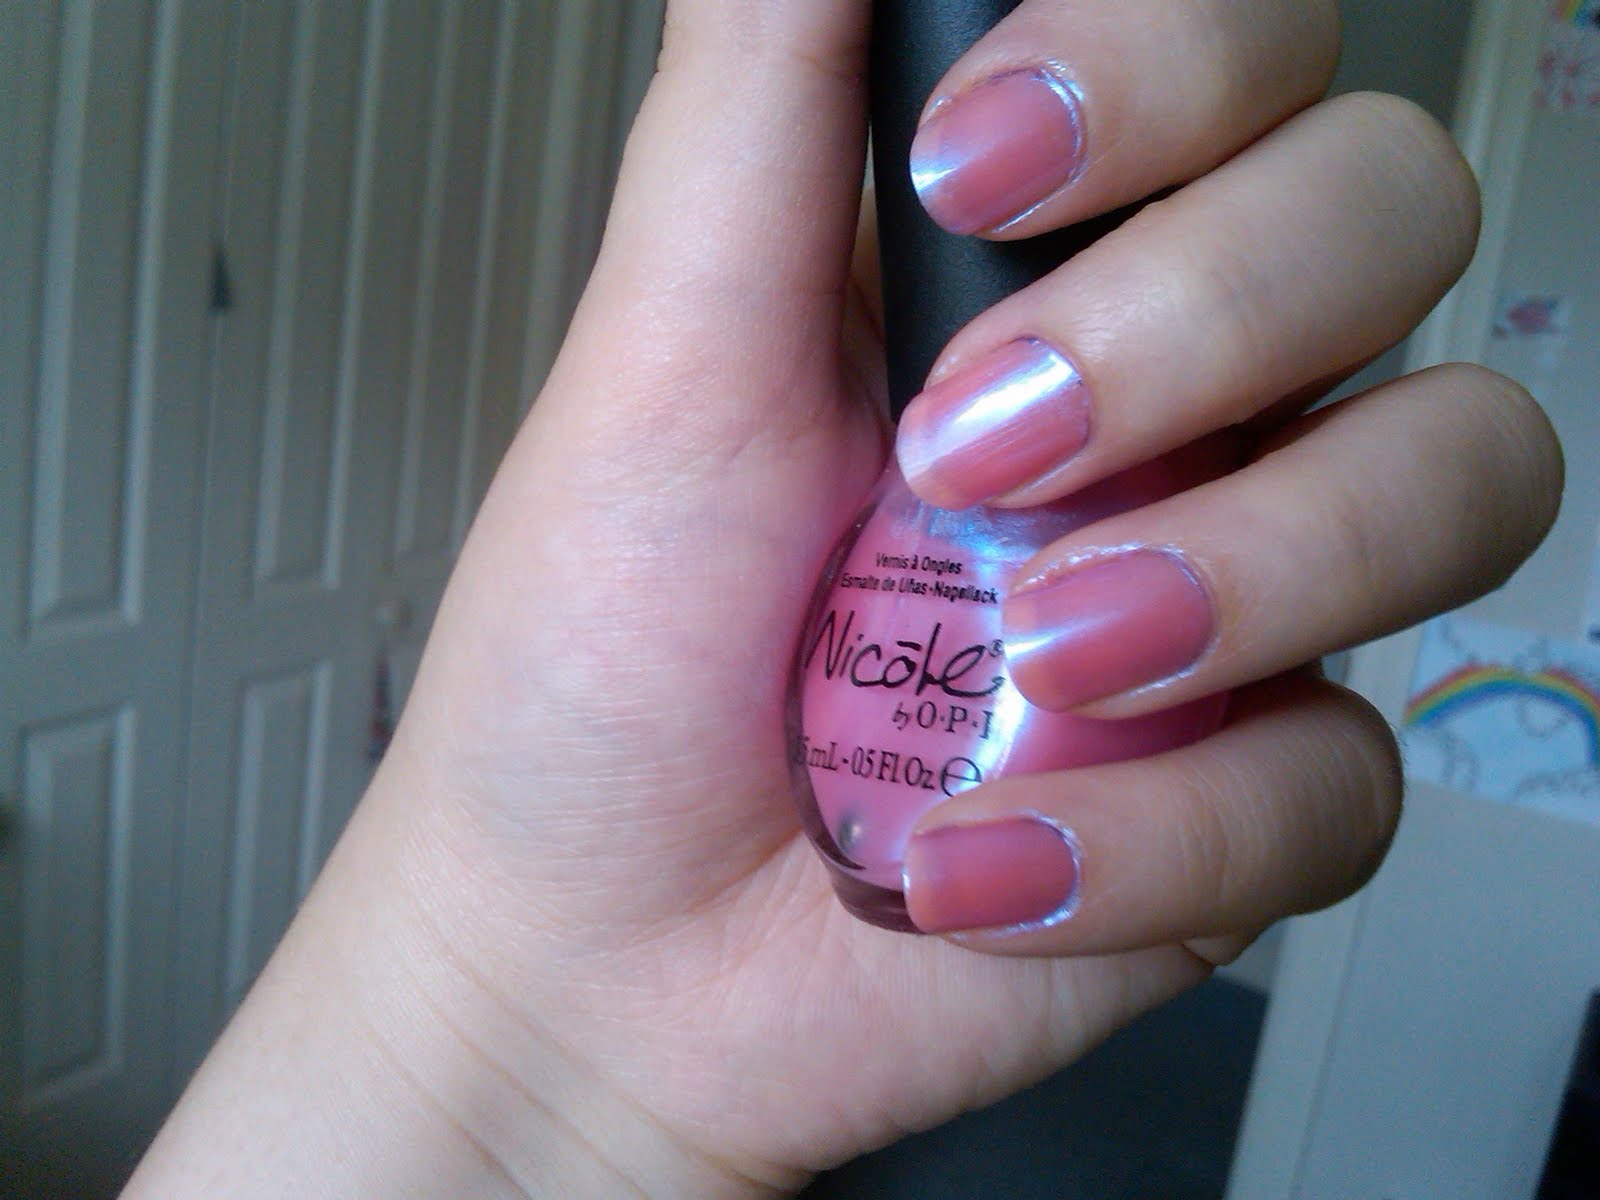 3. Nicole by OPI Color Changing Nail Polish - wide 1